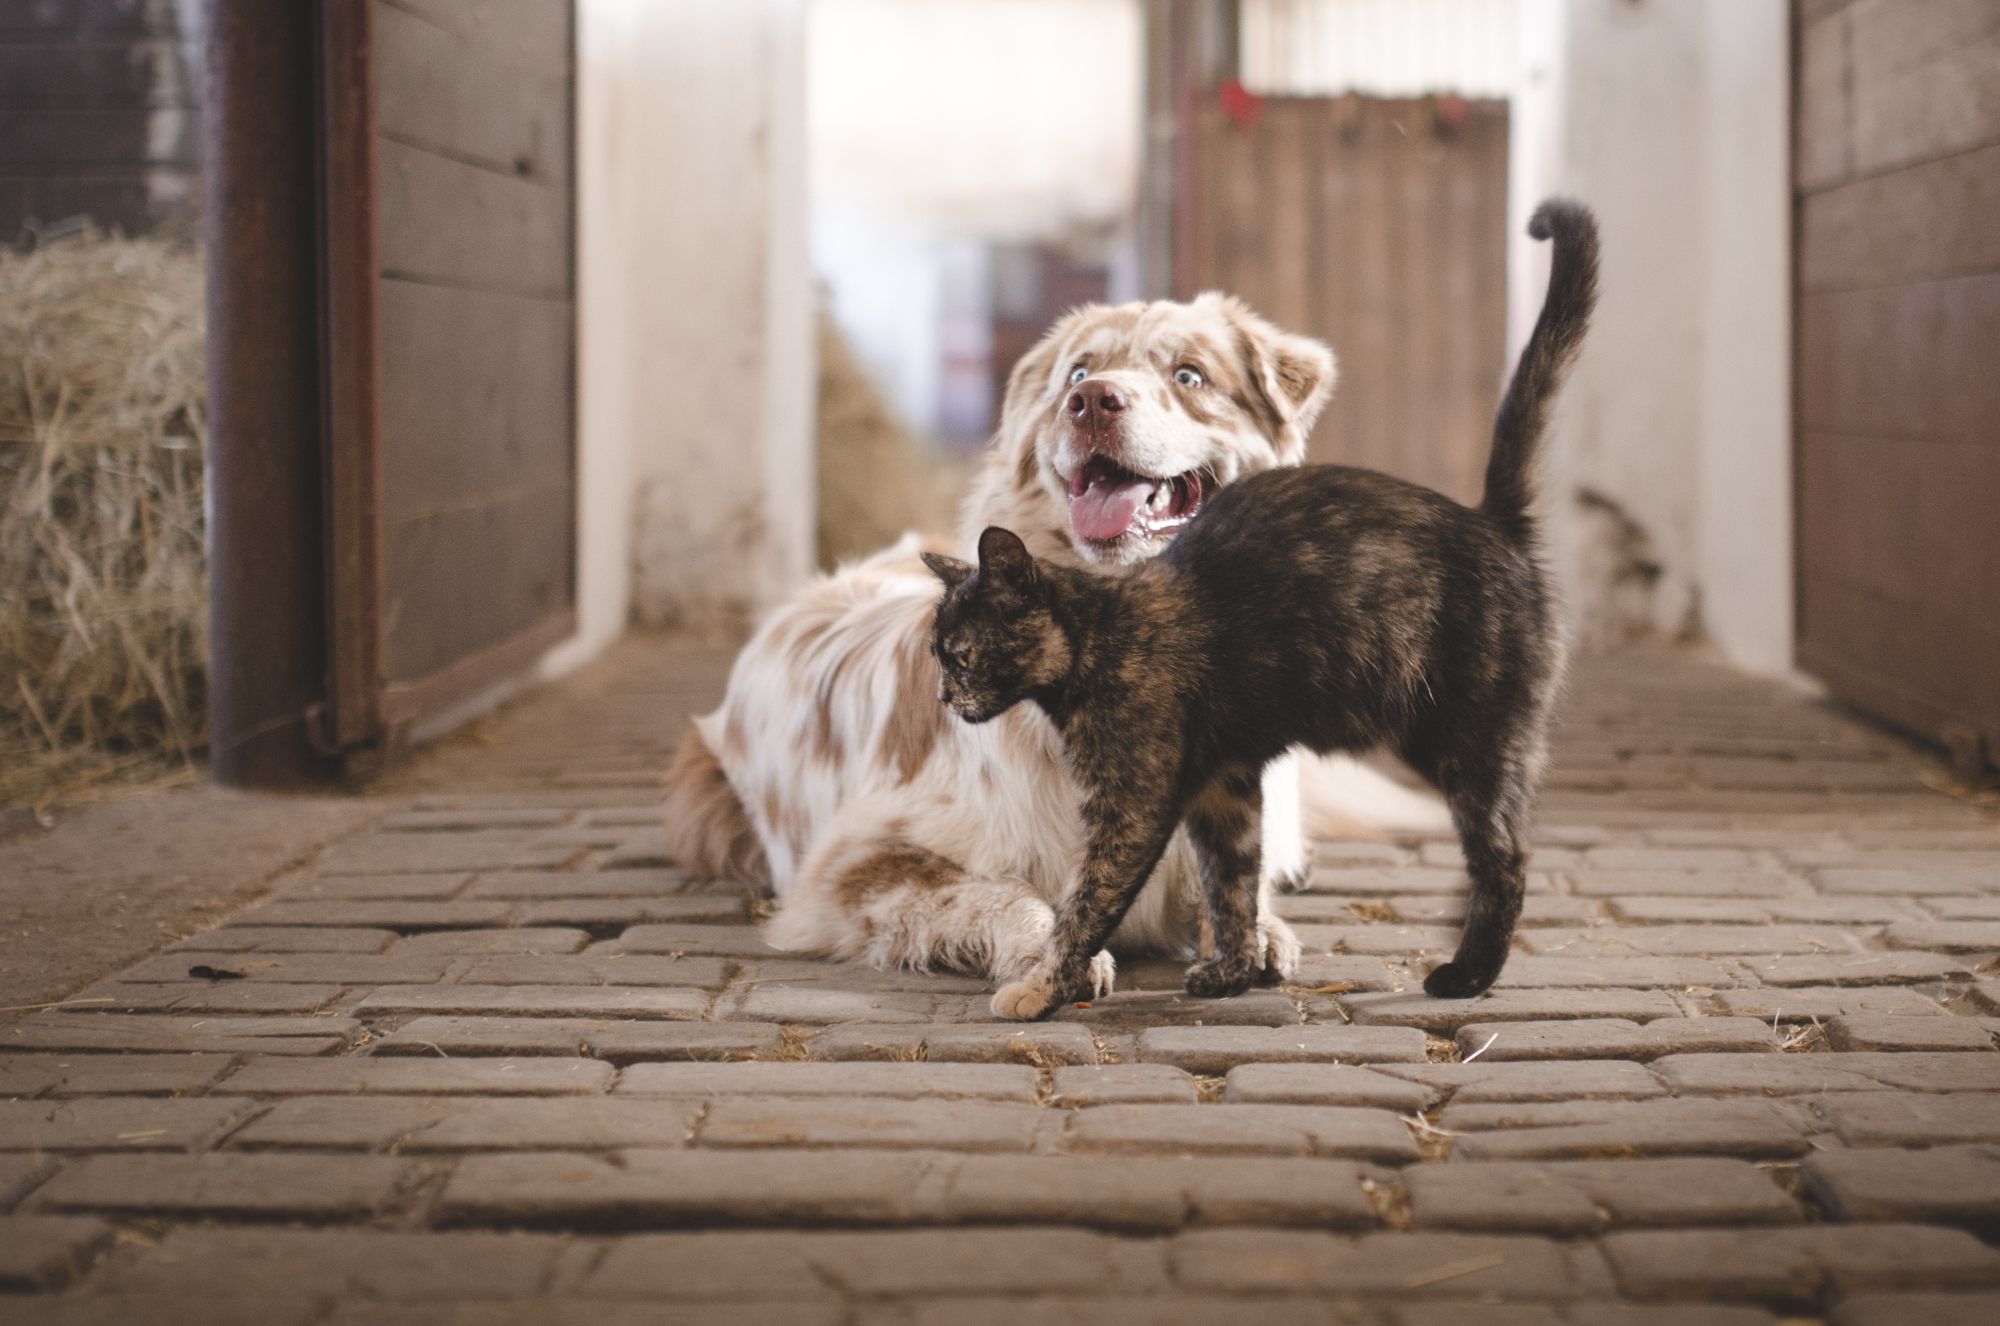 Image of dog and cat playing together